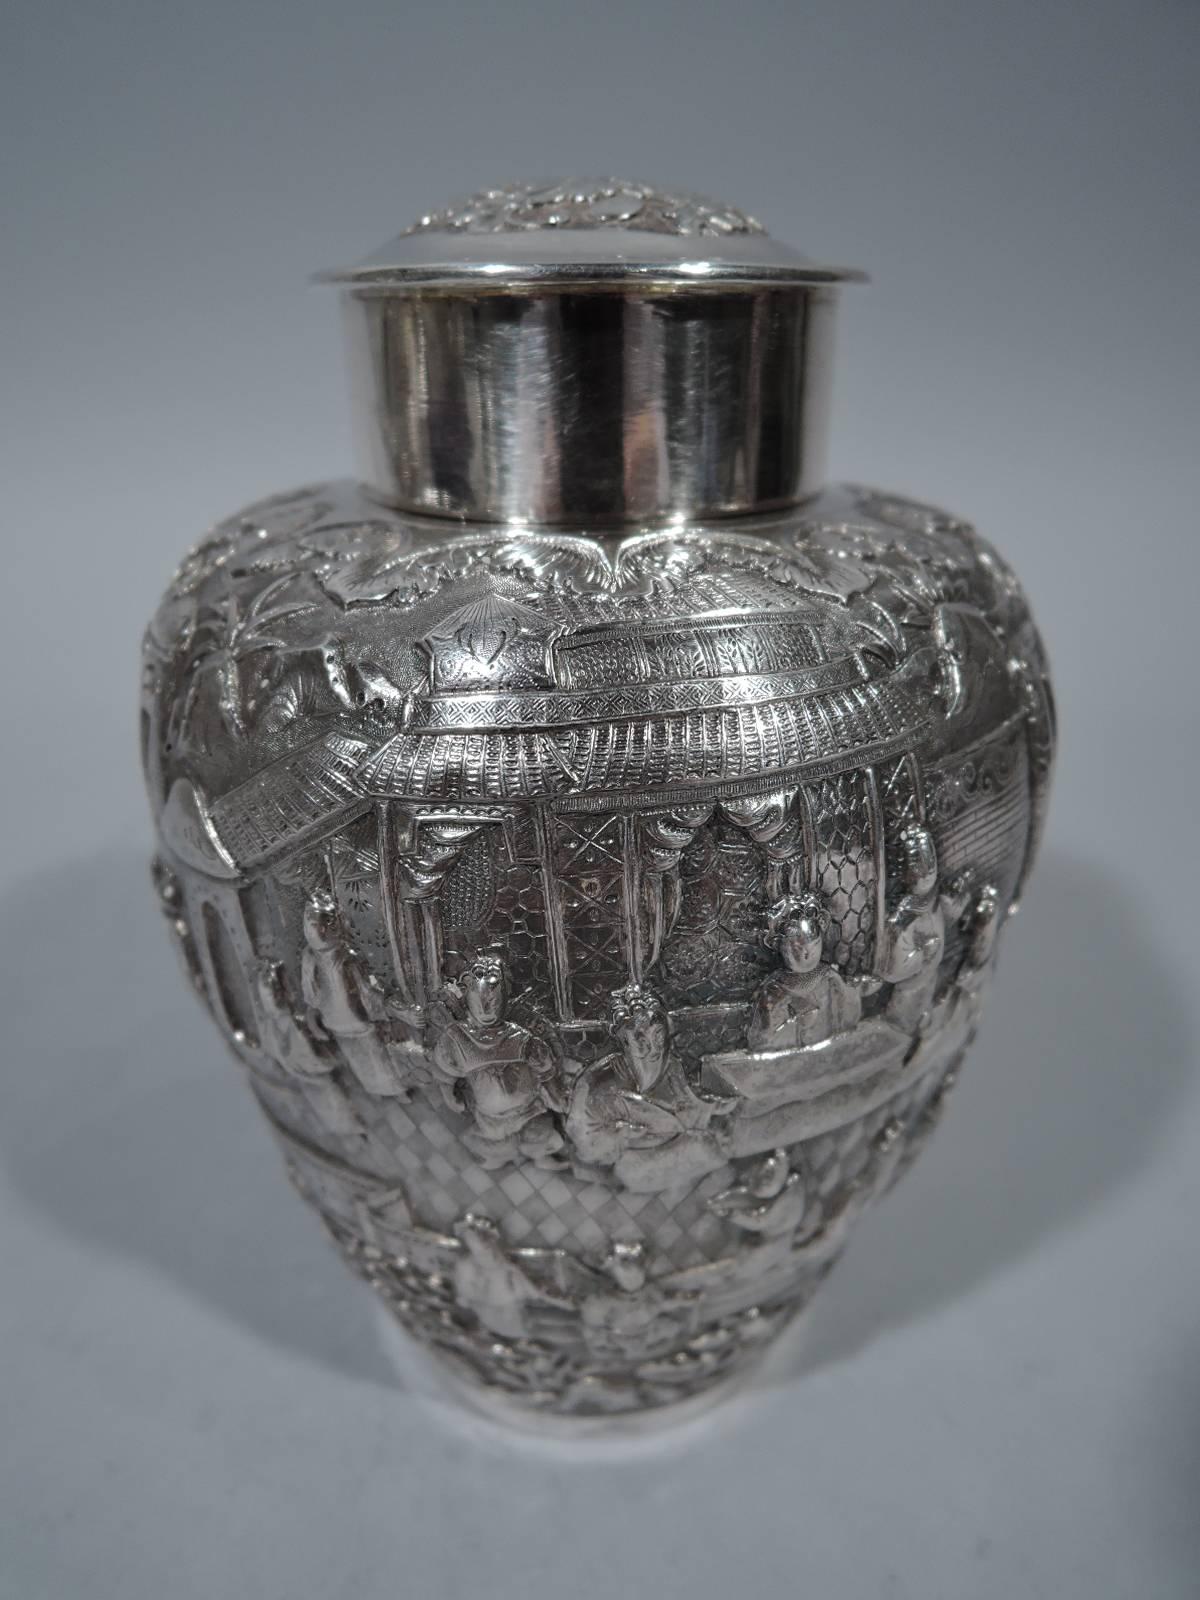 Chinese export silver tea caddy, circa 1900. Ovoid ginger jar form with short neck and cover. Dense frieze peopled with warriors and sages against a background of pavilions, bamboo, and blossoming prunus branches. Rectangular frame with interlaced